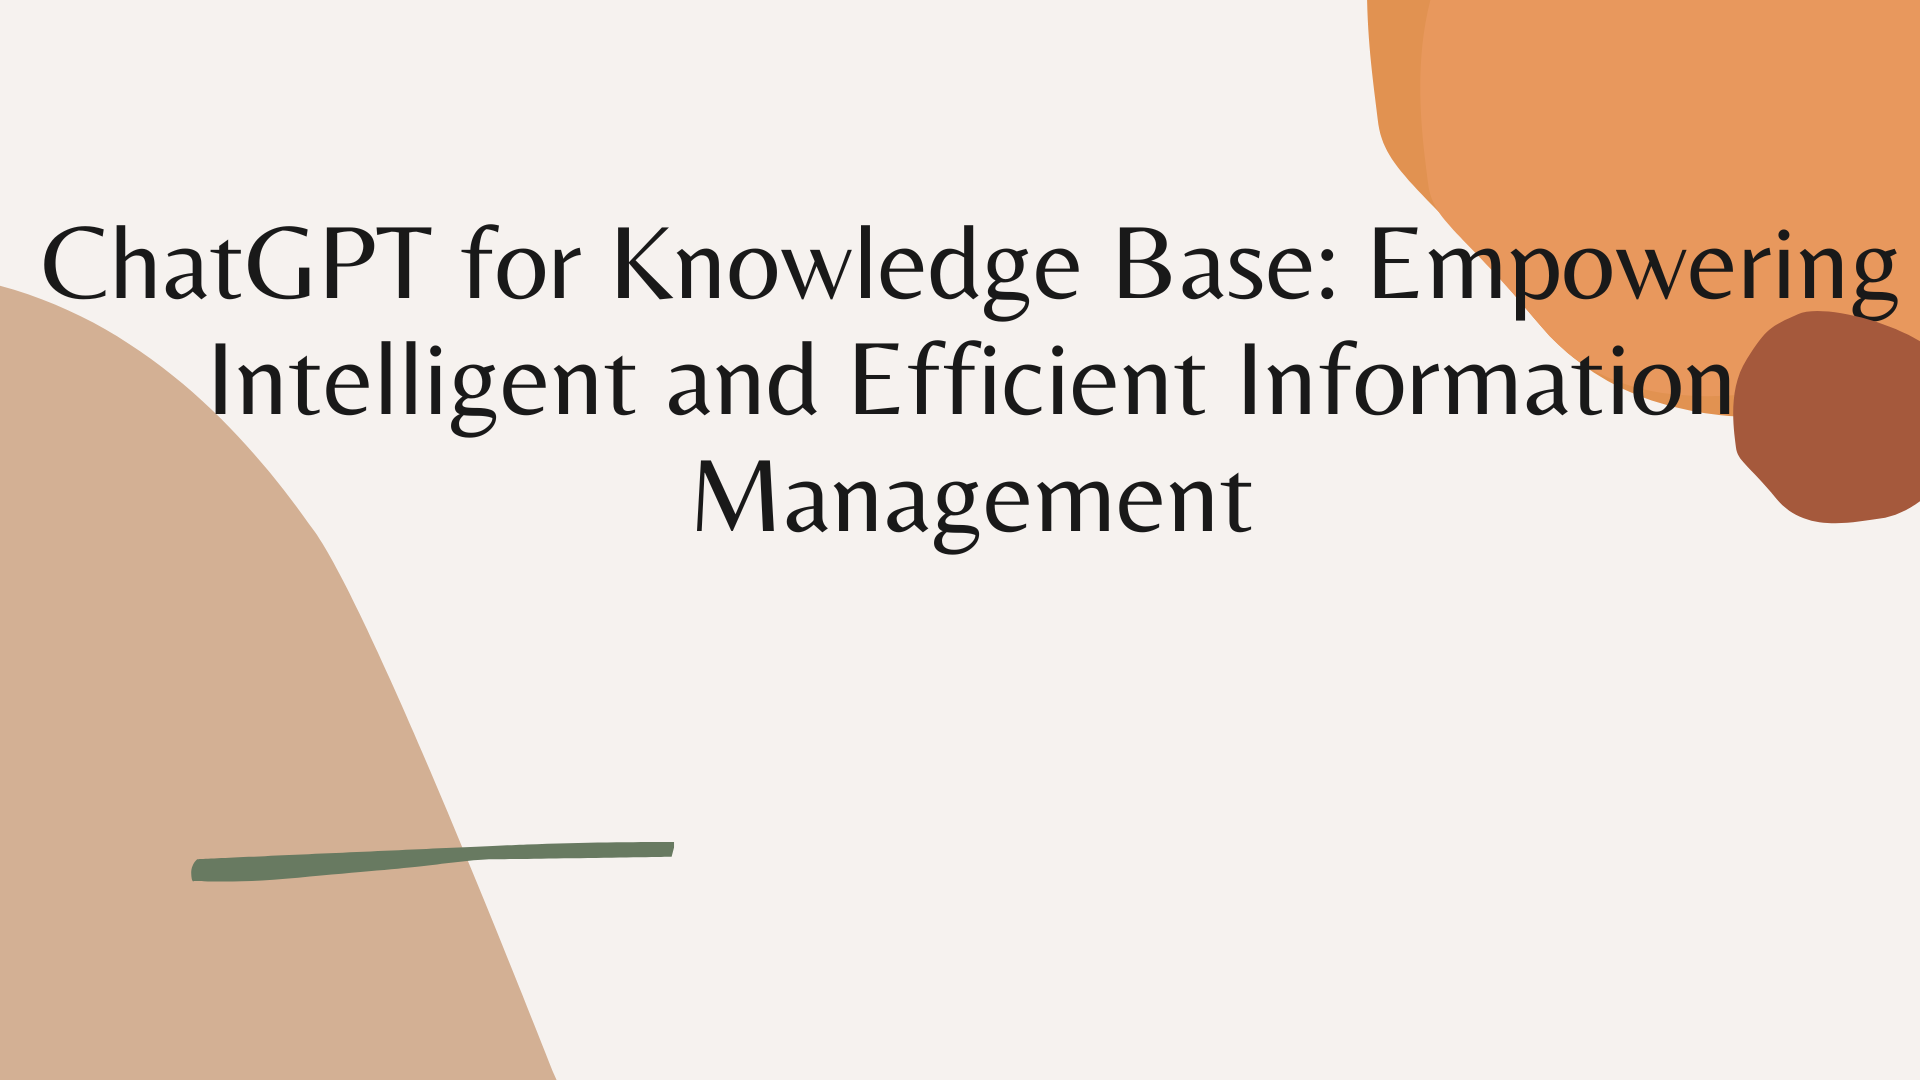 ChatGPT for Knowledge Base Empowering Intelligent and Efficient Information Management